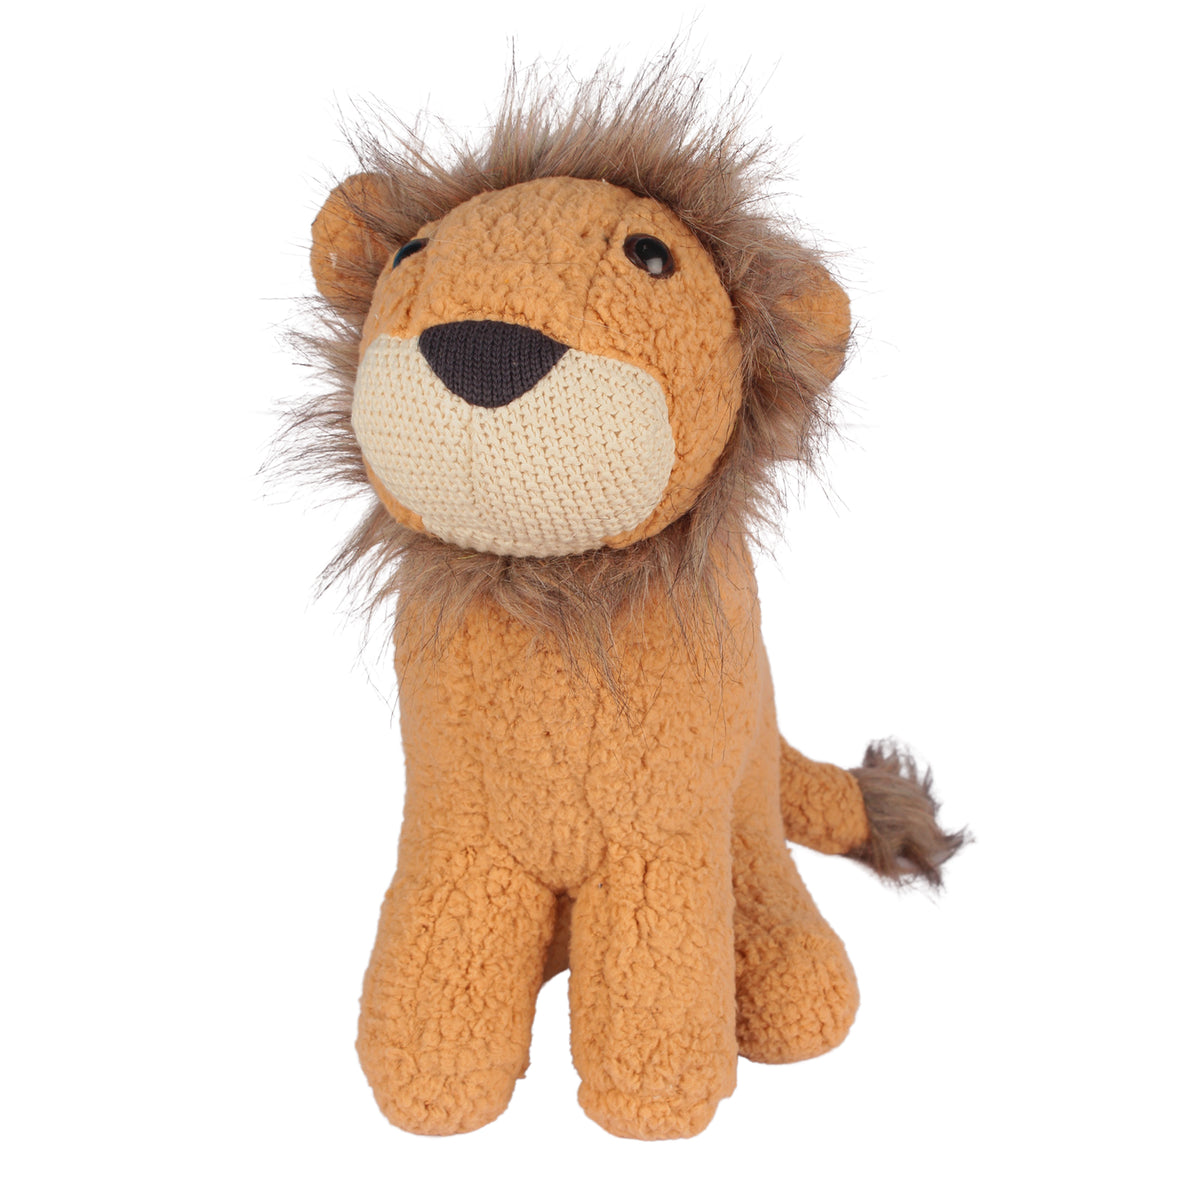 Stuffed Lion Animal Baby Toys Super Soft Fabric & Filling Toy for Girl/Boys (Brown)